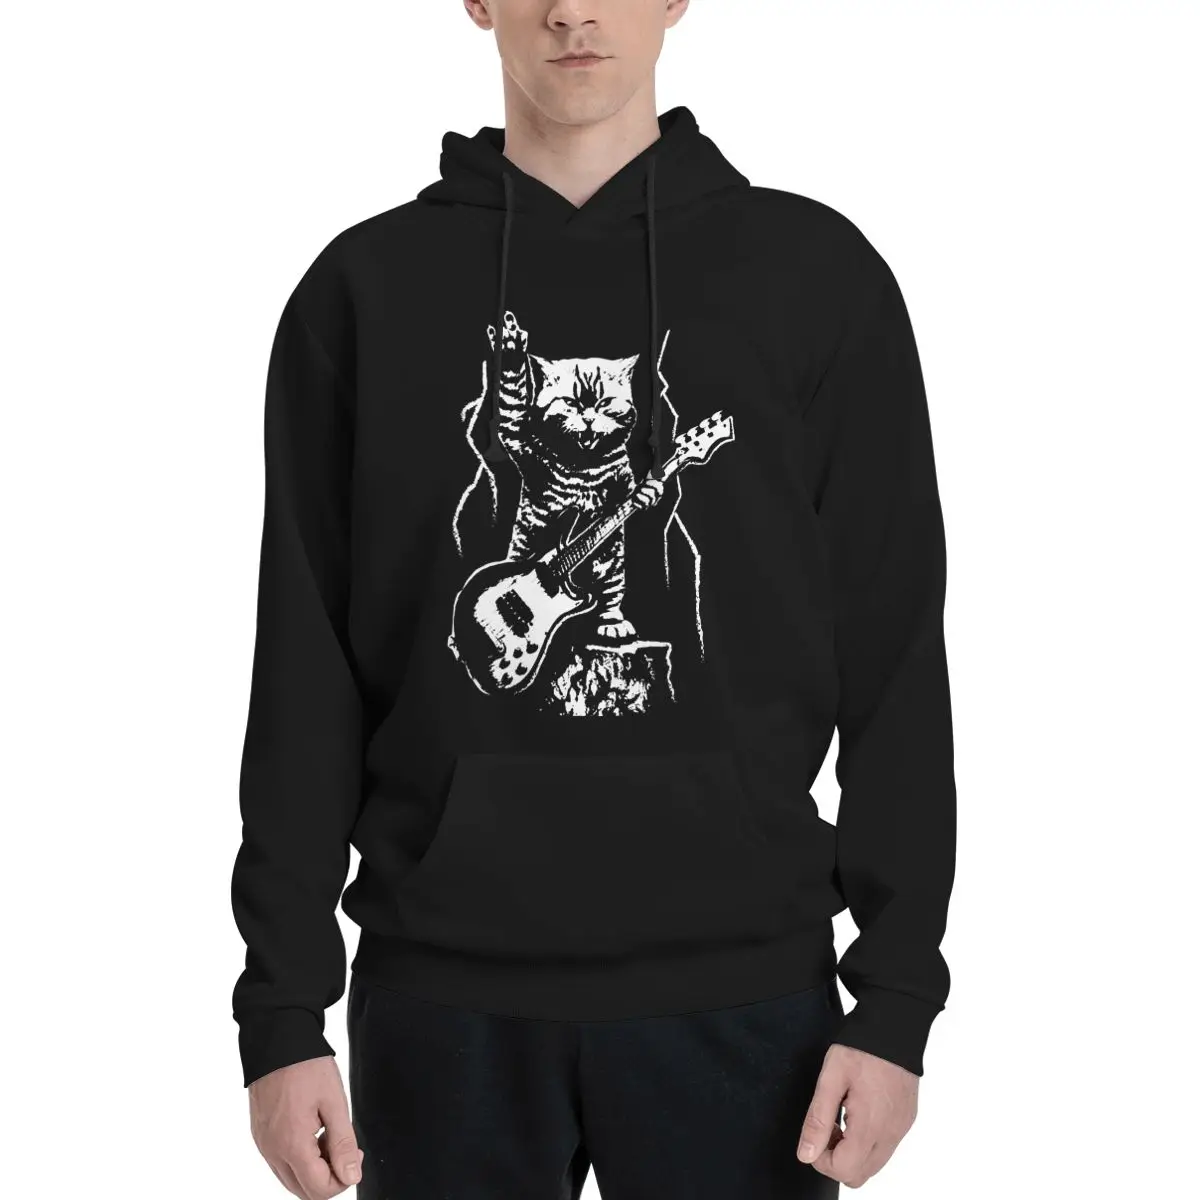 

Cat Lover Bass Guitar Player Rock N Roll Guitarist Bassist Polyester Hoodie Men's sweatershirt Warm Dif Colors Sizes